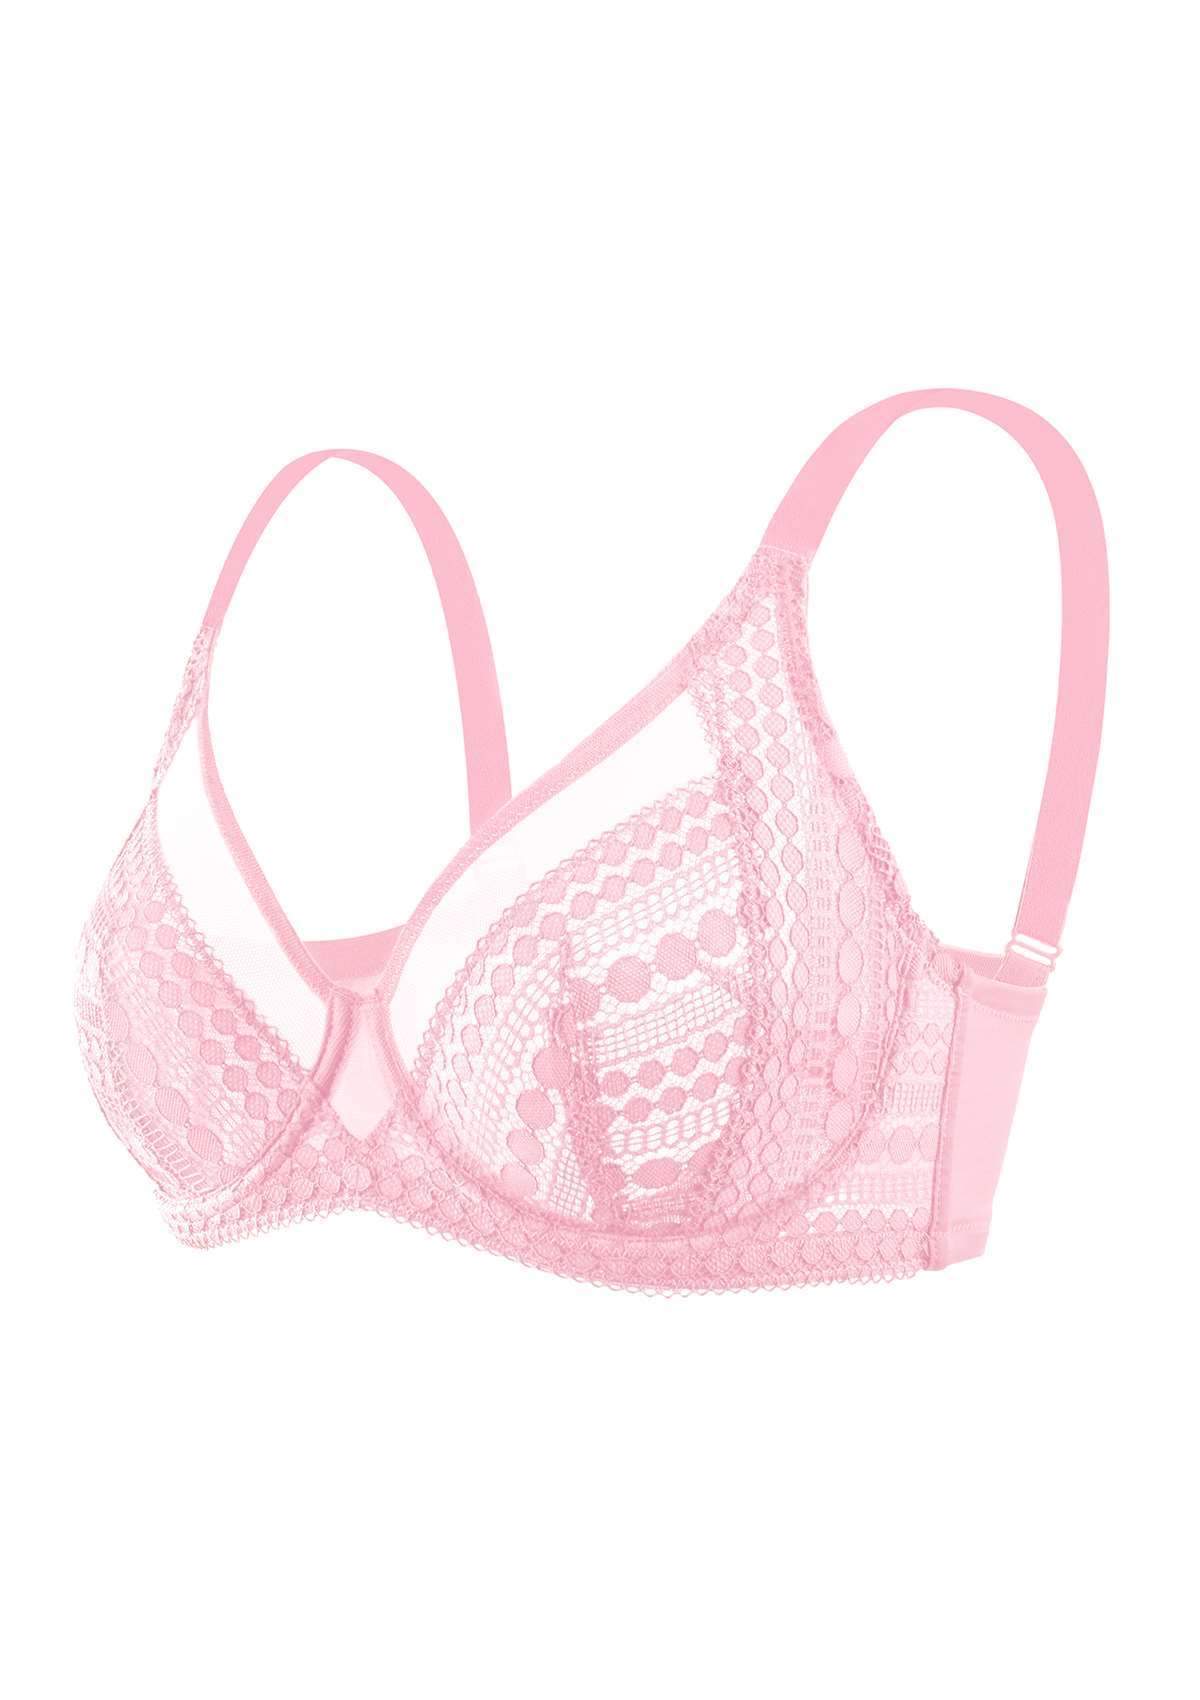 HSIA Heroine Lace Bra And Panties Set: Most Comfortable Supportive Bra - Pink / 40 / C